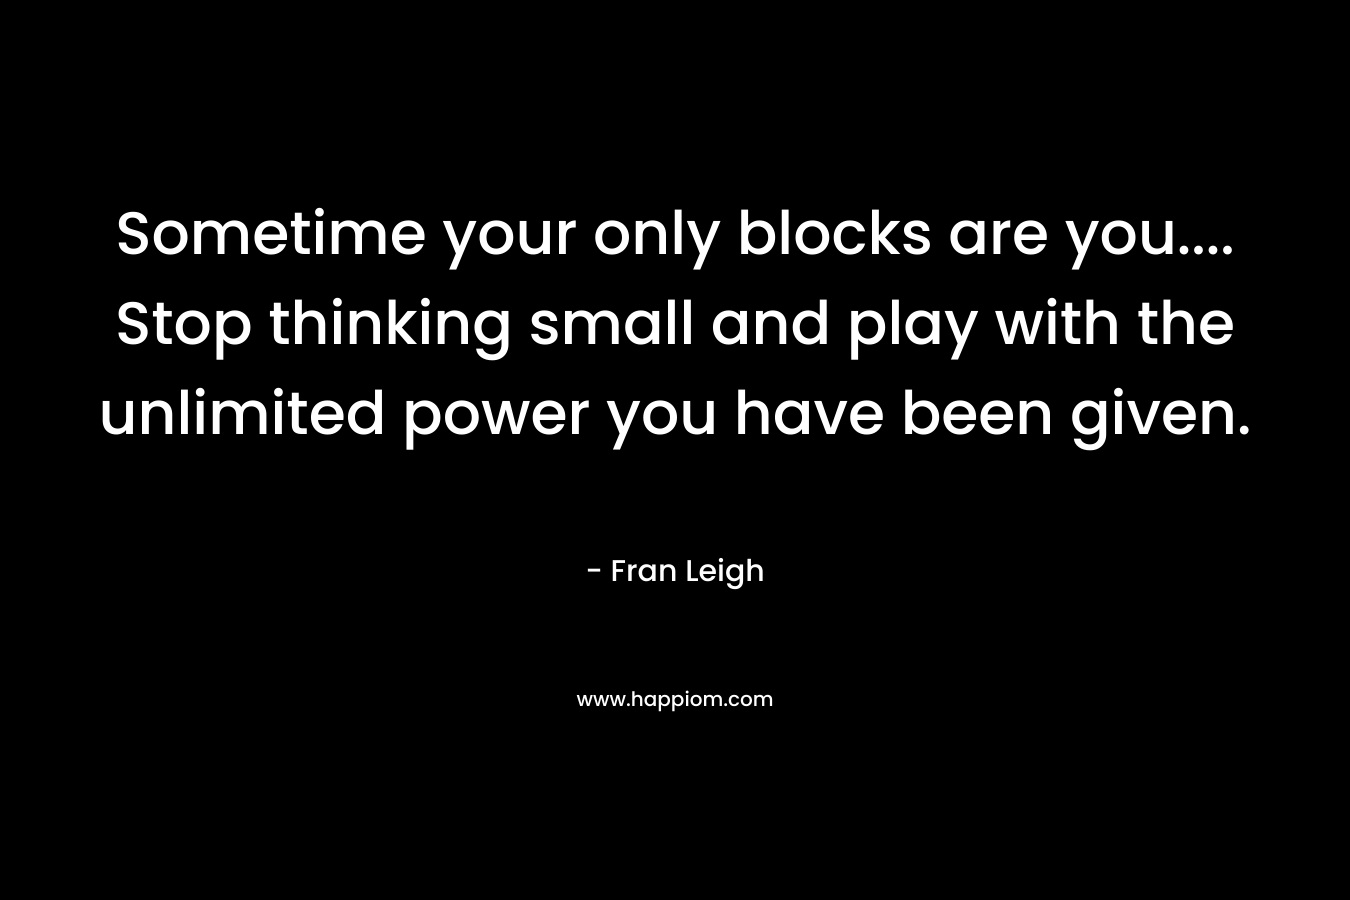 Sometime your only blocks are you…. Stop thinking small and play with the unlimited power you have been given. – Fran Leigh